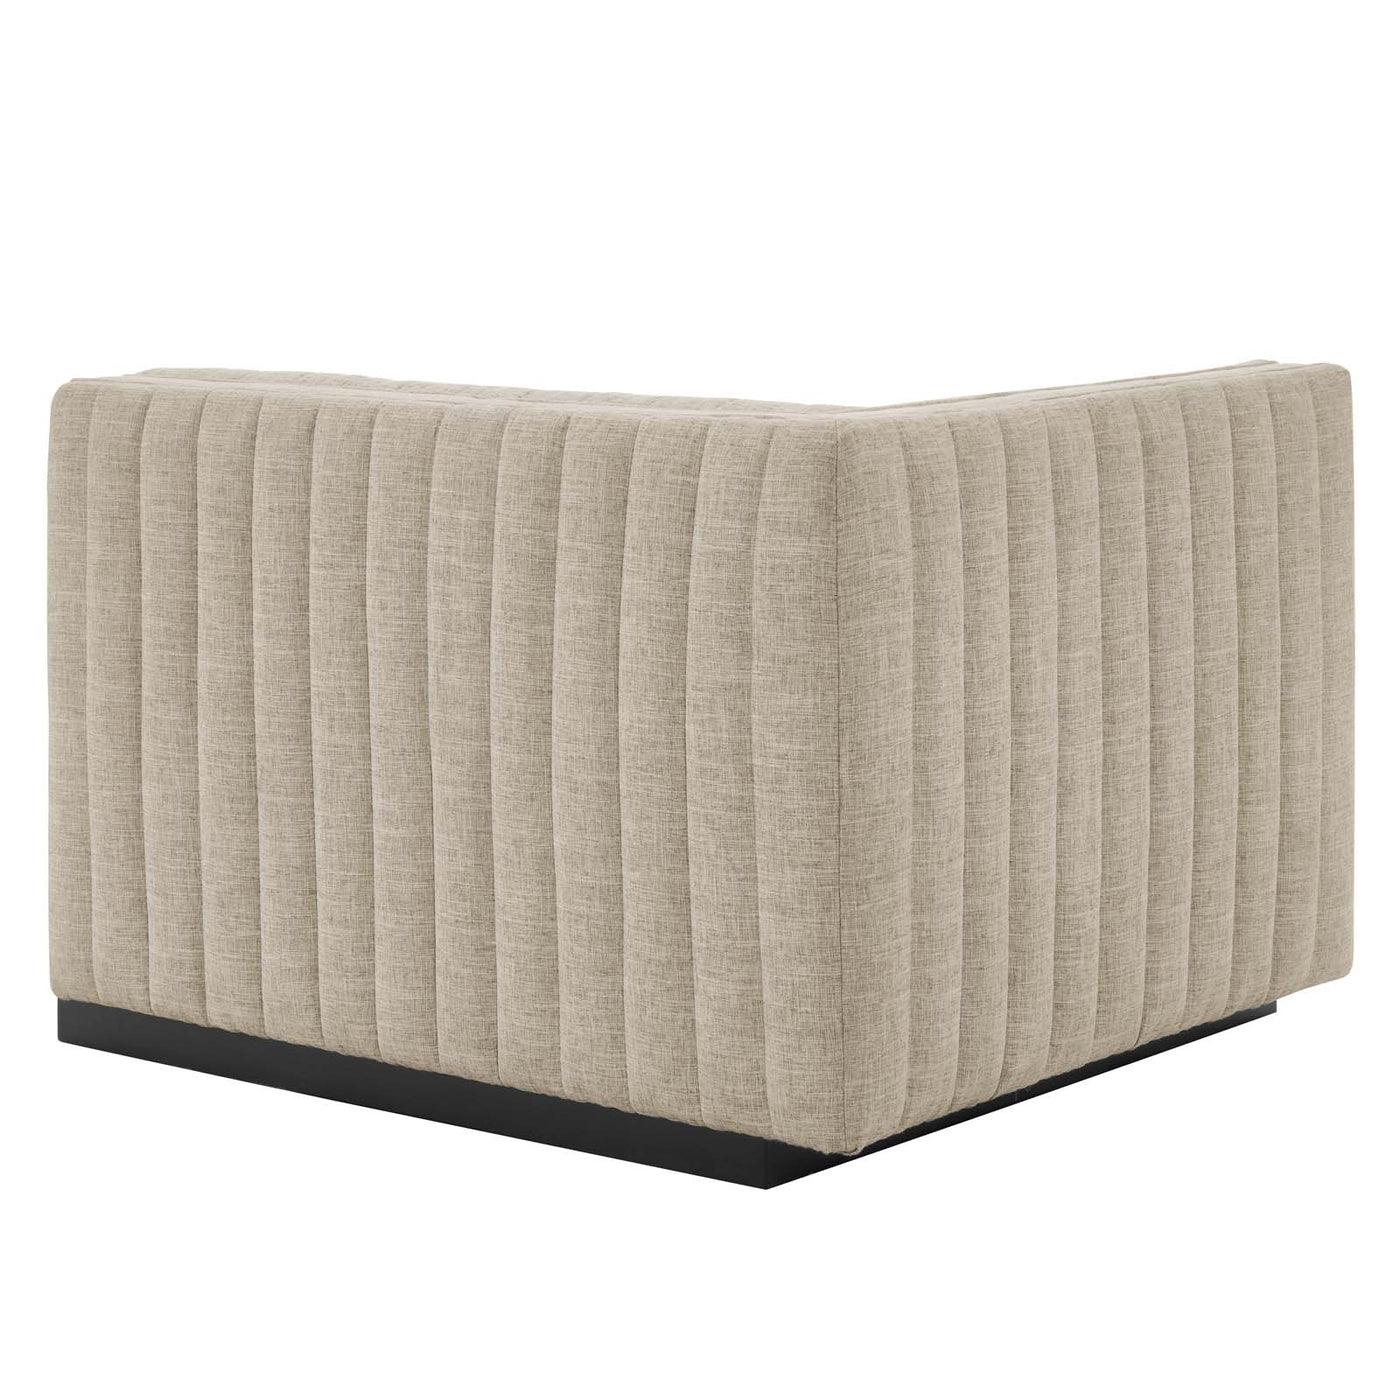 Conjure Channel Tufted Upholstered Fabric Loveseat